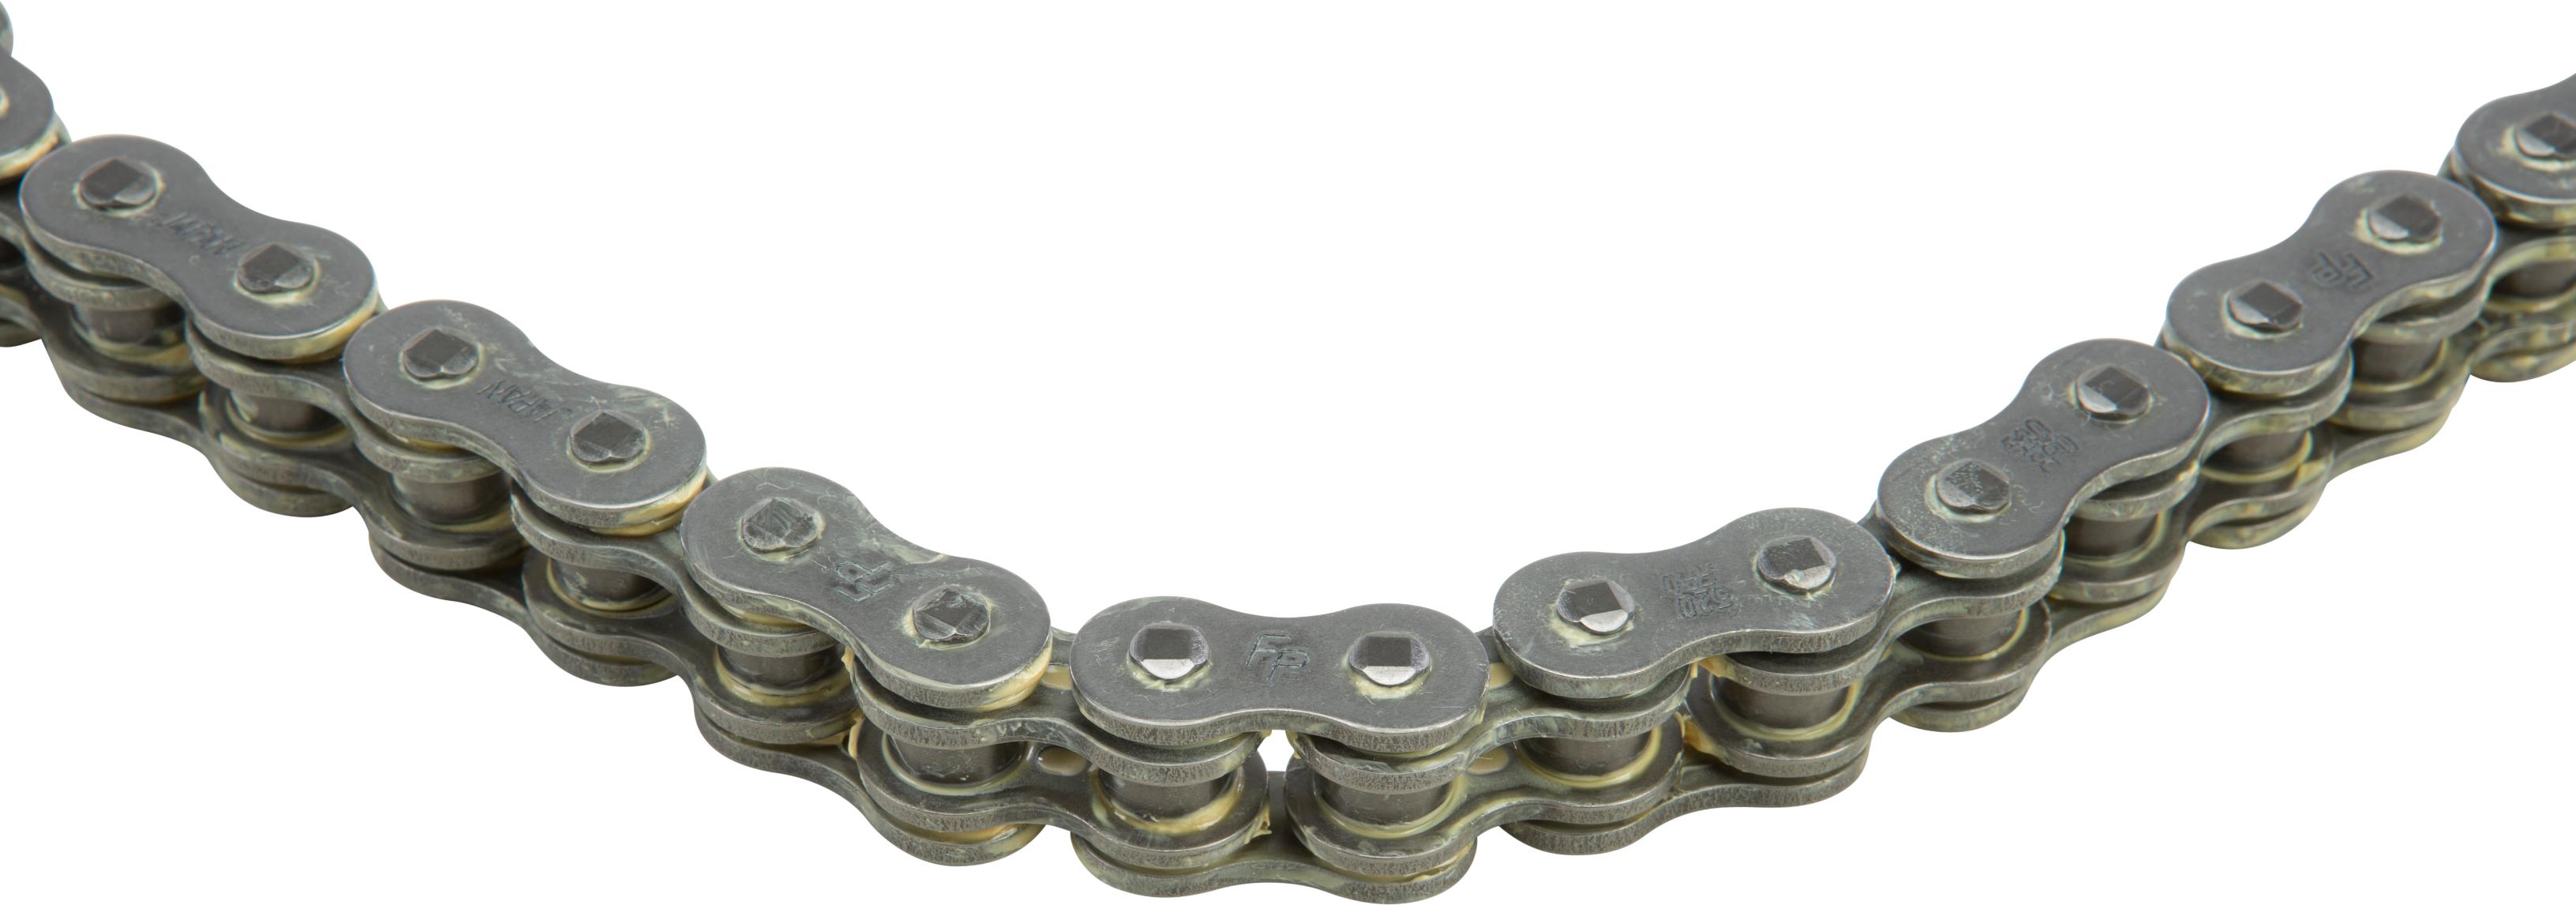 Fire Power - O-ring Chain 520x150 - 520FPO-150